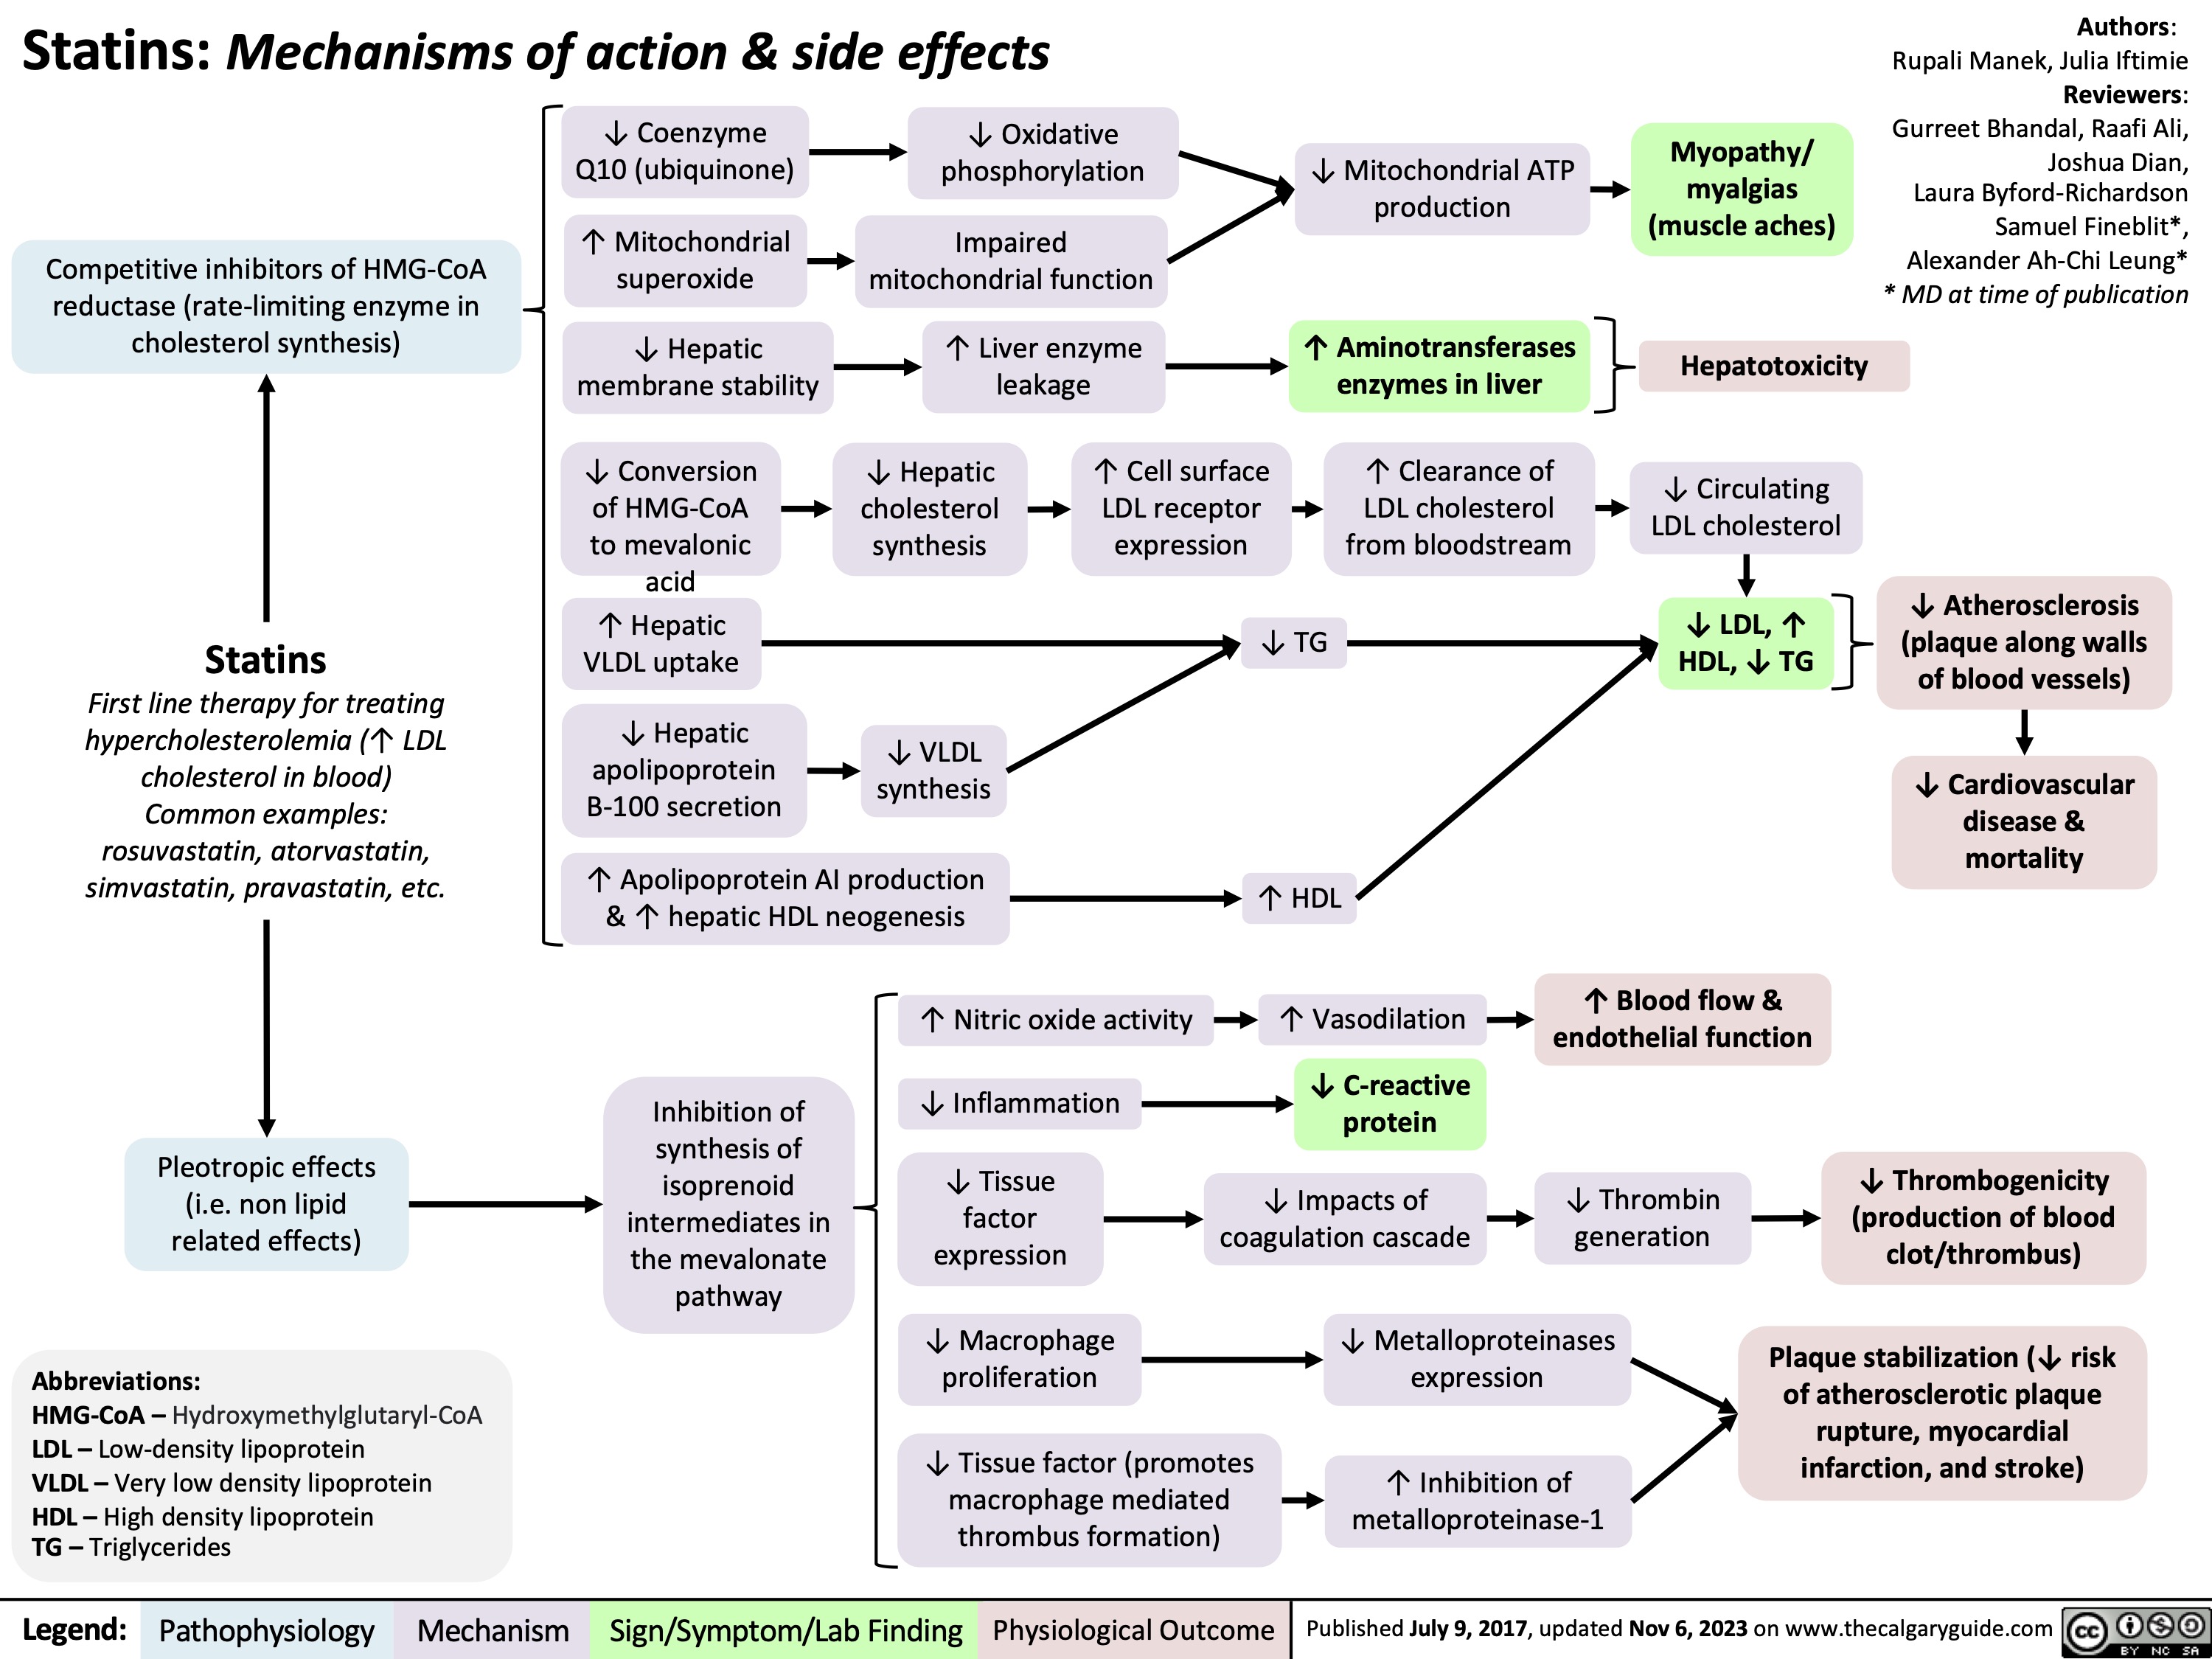 Statins: Mechanisms of action & side effects
Authors: Rupali Manek, Julia Iftimie Reviewers: Gurreet Bhandal, Raafi Ali, Joshua Dian, Laura Byford-Richardson Samuel Fineblit*, Alexander Ah-Chi Leung* * MD at time of publication
         Competitive inhibitors of HMG-CoA reductase (rate-limiting enzyme in cholesterol synthesis)
↓ Coenzyme Q10 (ubiquinone)
↑ Mitochondrial superoxide
↓ Hepatic membrane stability
↓ Conversion of HMG-CoA to mevalonic acid
↑ Hepatic VLDL uptake
↓ Hepatic apolipoprotein B-100 secretion
↓ Oxidative phosphorylation
Impaired mitochondrial function
↑ Liver enzyme leakage
↓ Mitochondrial ATP production
↑ Aminotransferases enzymes in liver
↑ Clearance of
LDL cholesterol from bloodstream
Myopathy/ myalgias (muscle aches)
Hepatotoxicity
↓ Circulating LDL cholesterol
↓ LDL, ↑ HDL, ↓ TG
           ↓ Hepatic cholesterol synthesis
↓ VLDL synthesis
↑ Cell surface LDL receptor expression
     Statins
First line therapy for treating hypercholesterolemia (↑ LDL cholesterol in blood) Common examples: rosuvastatin, atorvastatin, simvastatin, pravastatin, etc.
↑ Apolipoprotein AI production & ↑ hepatic HDL neogenesis
↓ TG
↑ HDL
↑ Vasodilation
↓ C-reactive protein
↓ Impacts of coagulation cascade
↓ Atherosclerosis (plaque along walls of blood vessels)
↓ Cardiovascular disease & mortality
                   Pleotropic effects (i.e. non lipid related effects)
Abbreviations:
HMG-CoA – Hydroxymethylglutaryl-CoA LDL – Low-density lipoprotein
VLDL – Very low density lipoprotein HDL – High density lipoprotein
TG – Triglycerides
Inhibition of synthesis of isoprenoid intermediates in the mevalonate pathway
↑ Nitric oxide activity ↓ Inflammation
↓ Tissue factor expression
↓ Macrophage proliferation
↓ Tissue factor (promotes macrophage mediated thrombus formation)
↑ Blood flow & endothelial function
↓ Thrombin generation
       ↓ Metalloproteinases expression
↑ Inhibition of metalloproteinase-1
↓ Thrombogenicity (production of blood clot/thrombus)
Plaque stabilization (↓ risk of atherosclerotic plaque rupture, myocardial infarction, and stroke)
       Legend:
 Pathophysiology
Mechanism
 Sign/Symptom/Lab Finding
 Physiological Outcome
 Published July 9, 2017, updated Nov 6, 2023 on www.thecalgaryguide.com
  